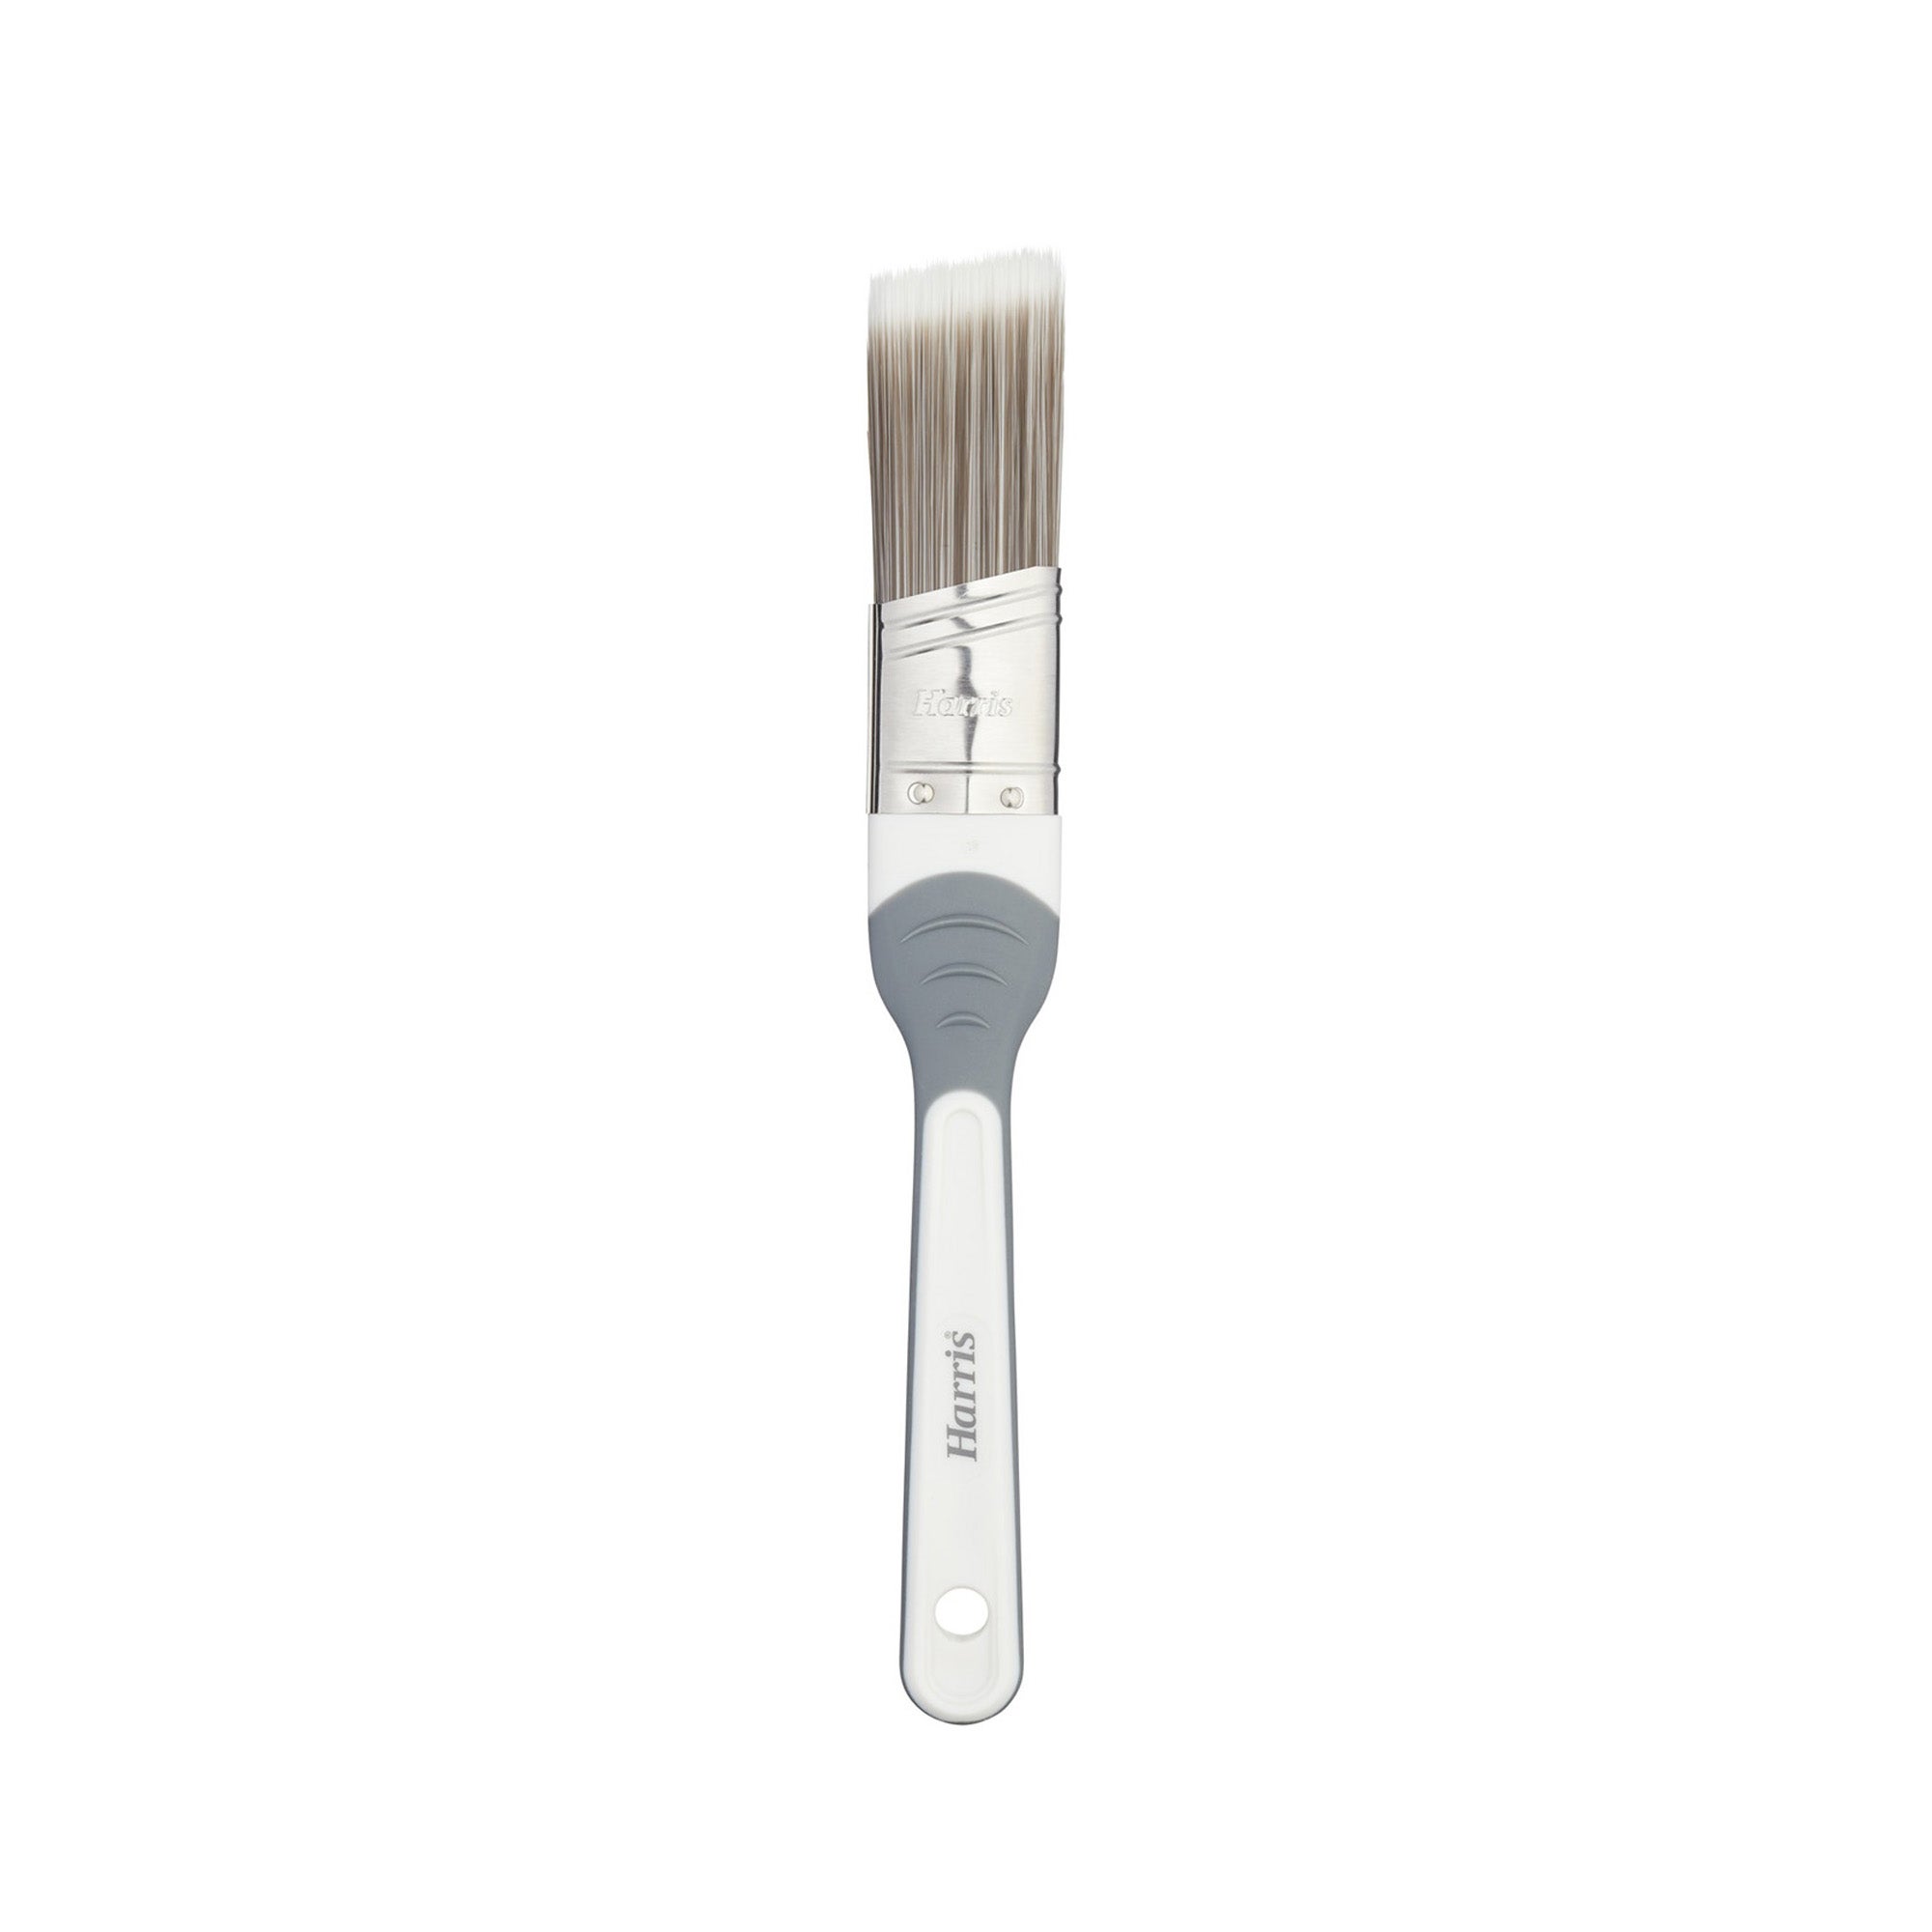 Harris Seriously Good Walls & Ceiling Angled Brush 1inch / 25mm